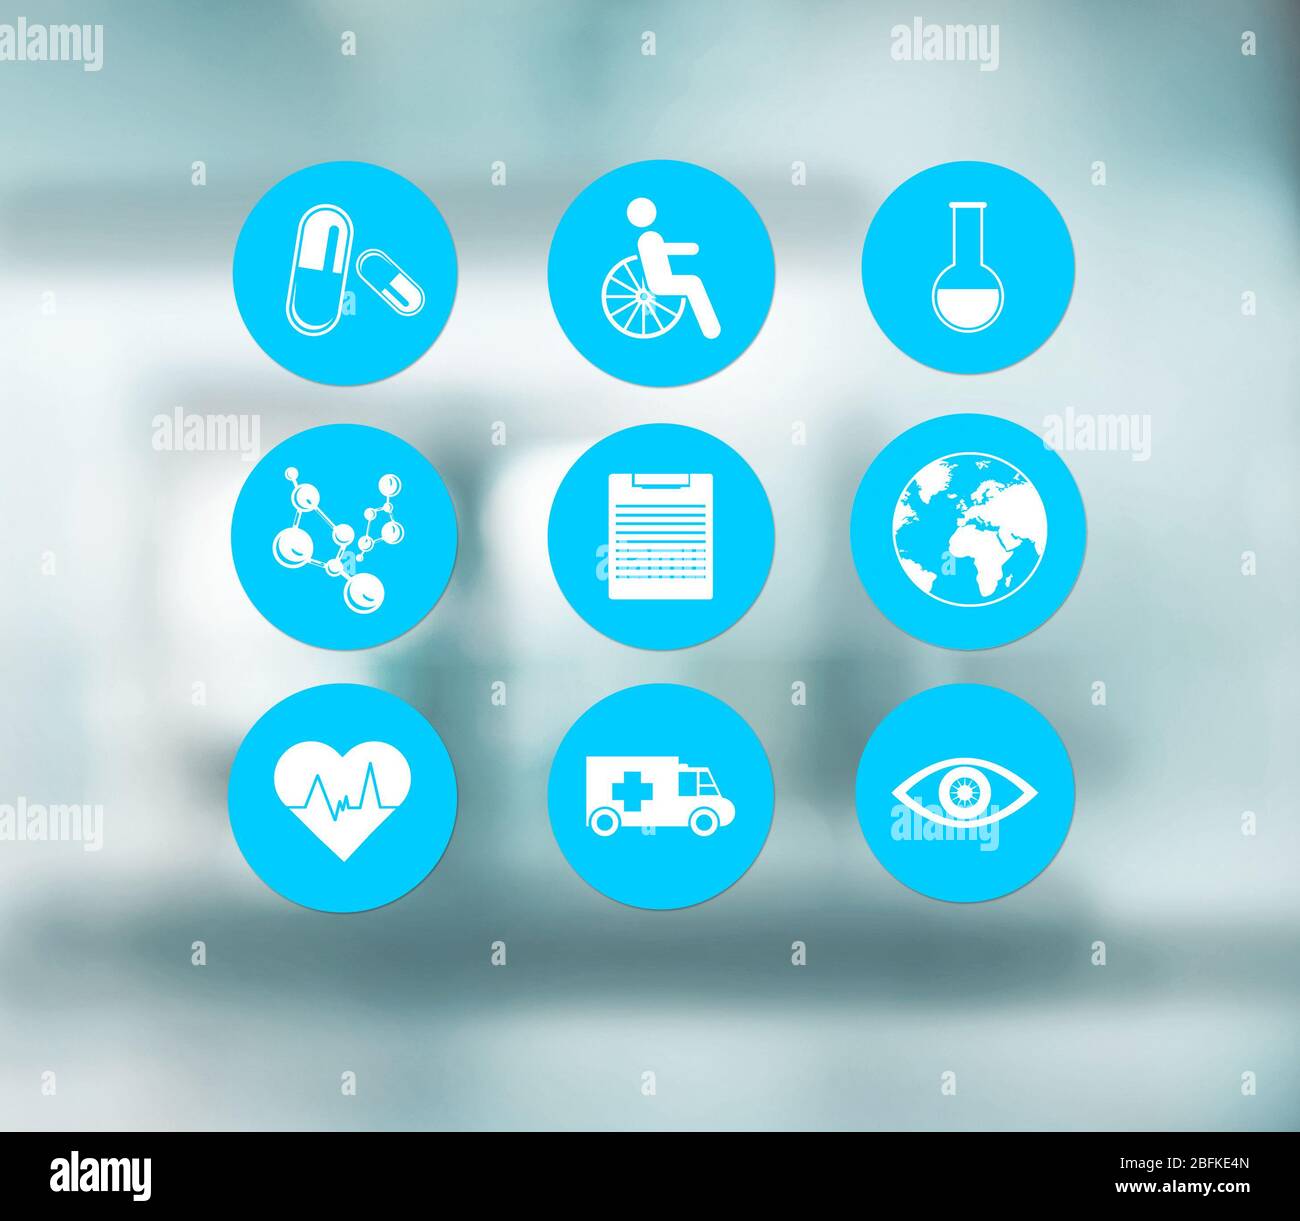 Medical icons set on abstract blue background Stock Photo